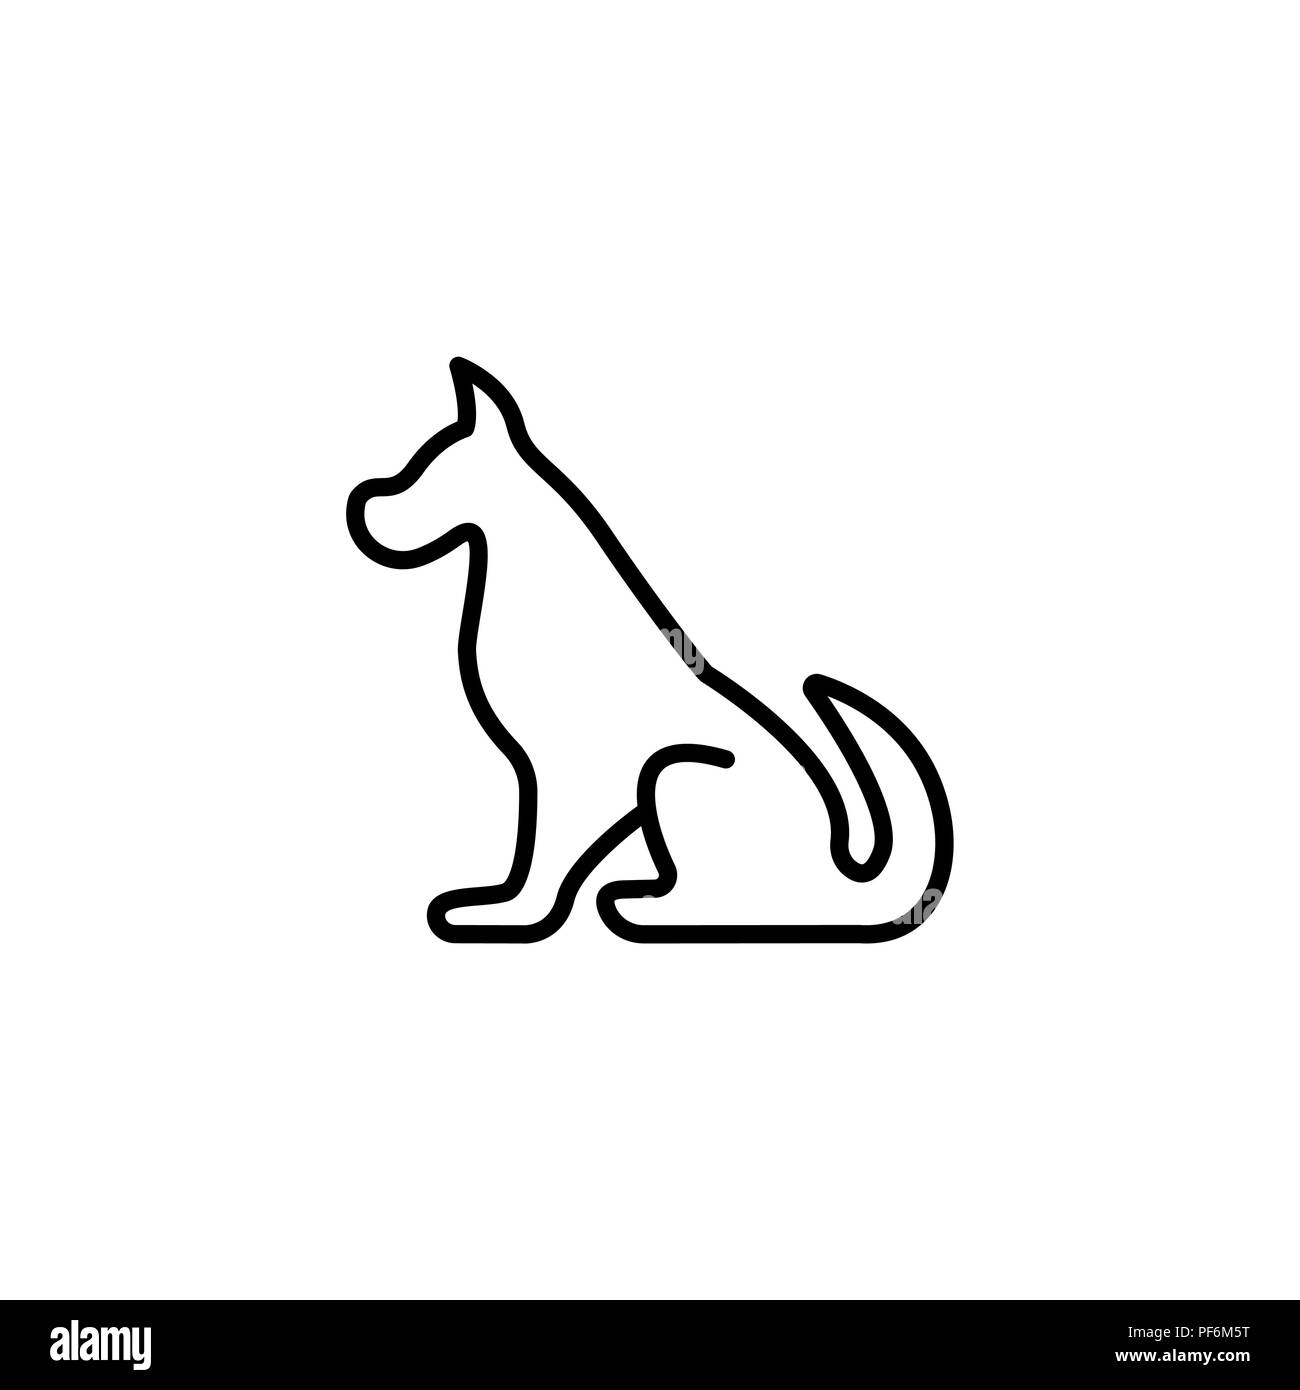 Dog sit silhouette Black and White Stock Photos & Images - Alamy